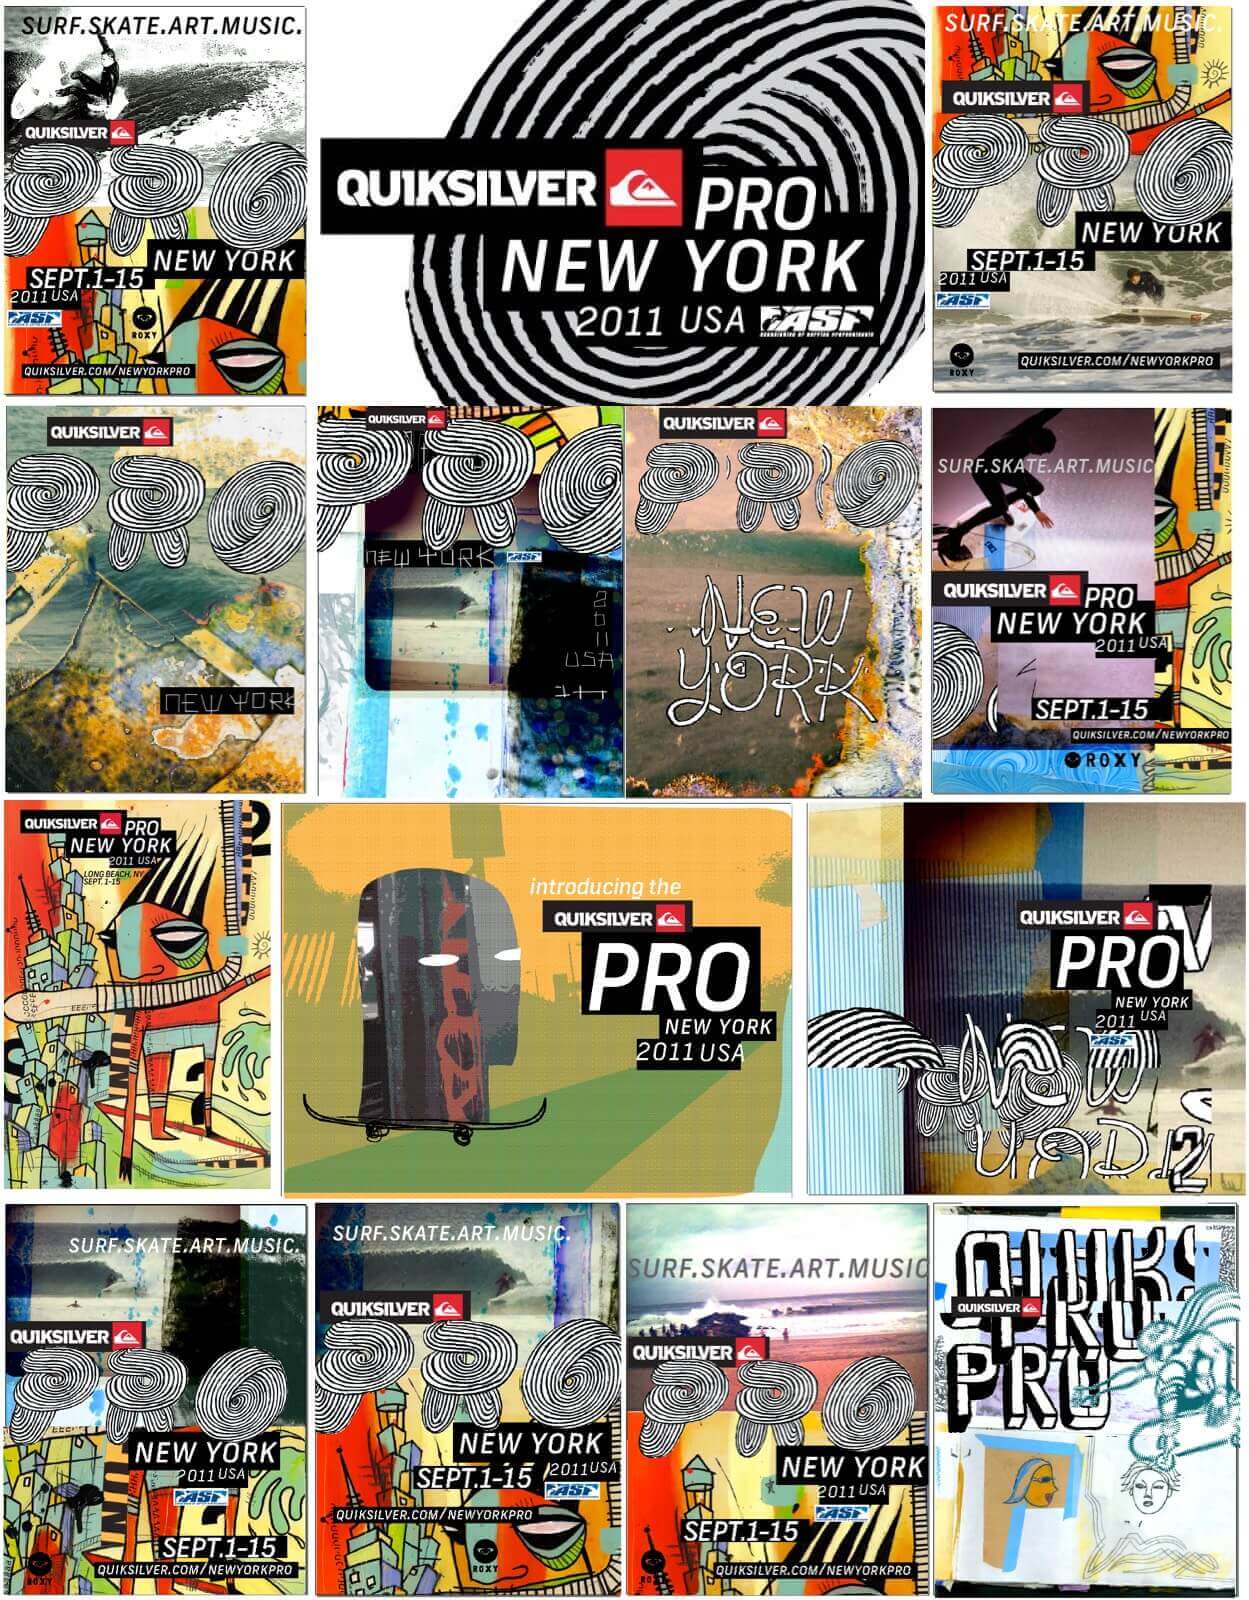 Quiksilver Pro New York concepts